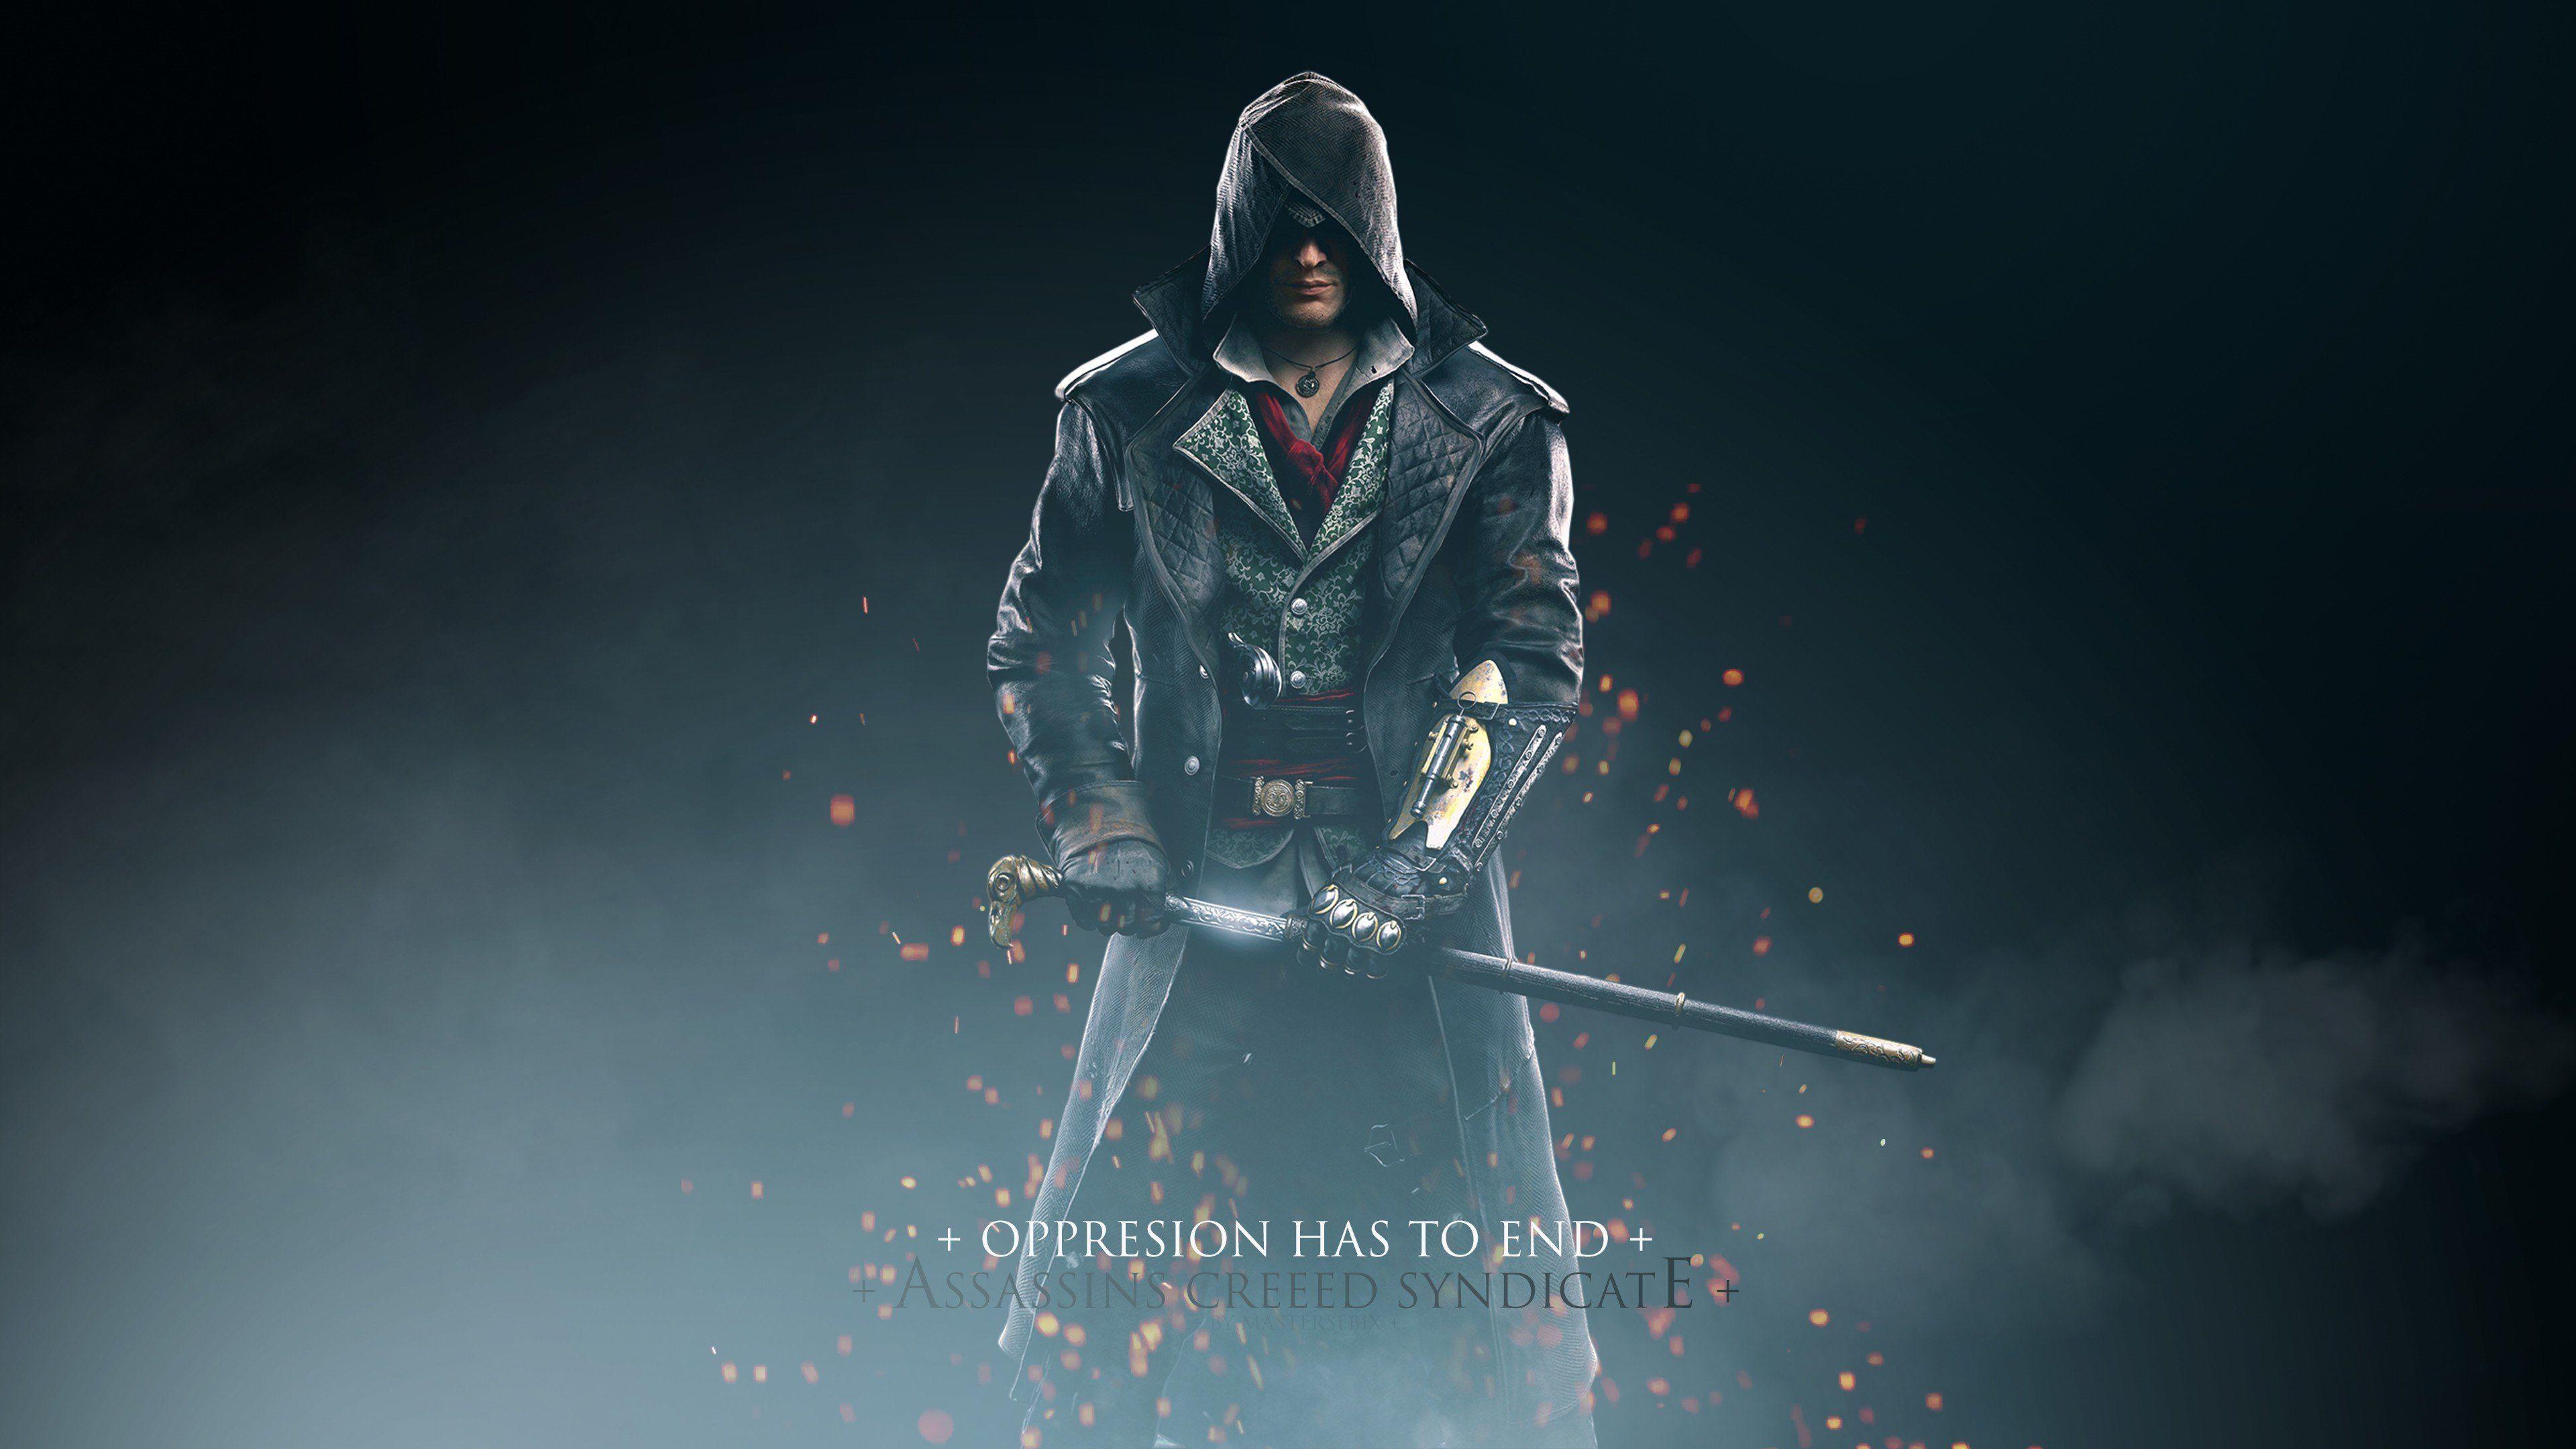 Assassin&Creed Syndicate Wallpapers · 4K HD Desktop Backgrounds